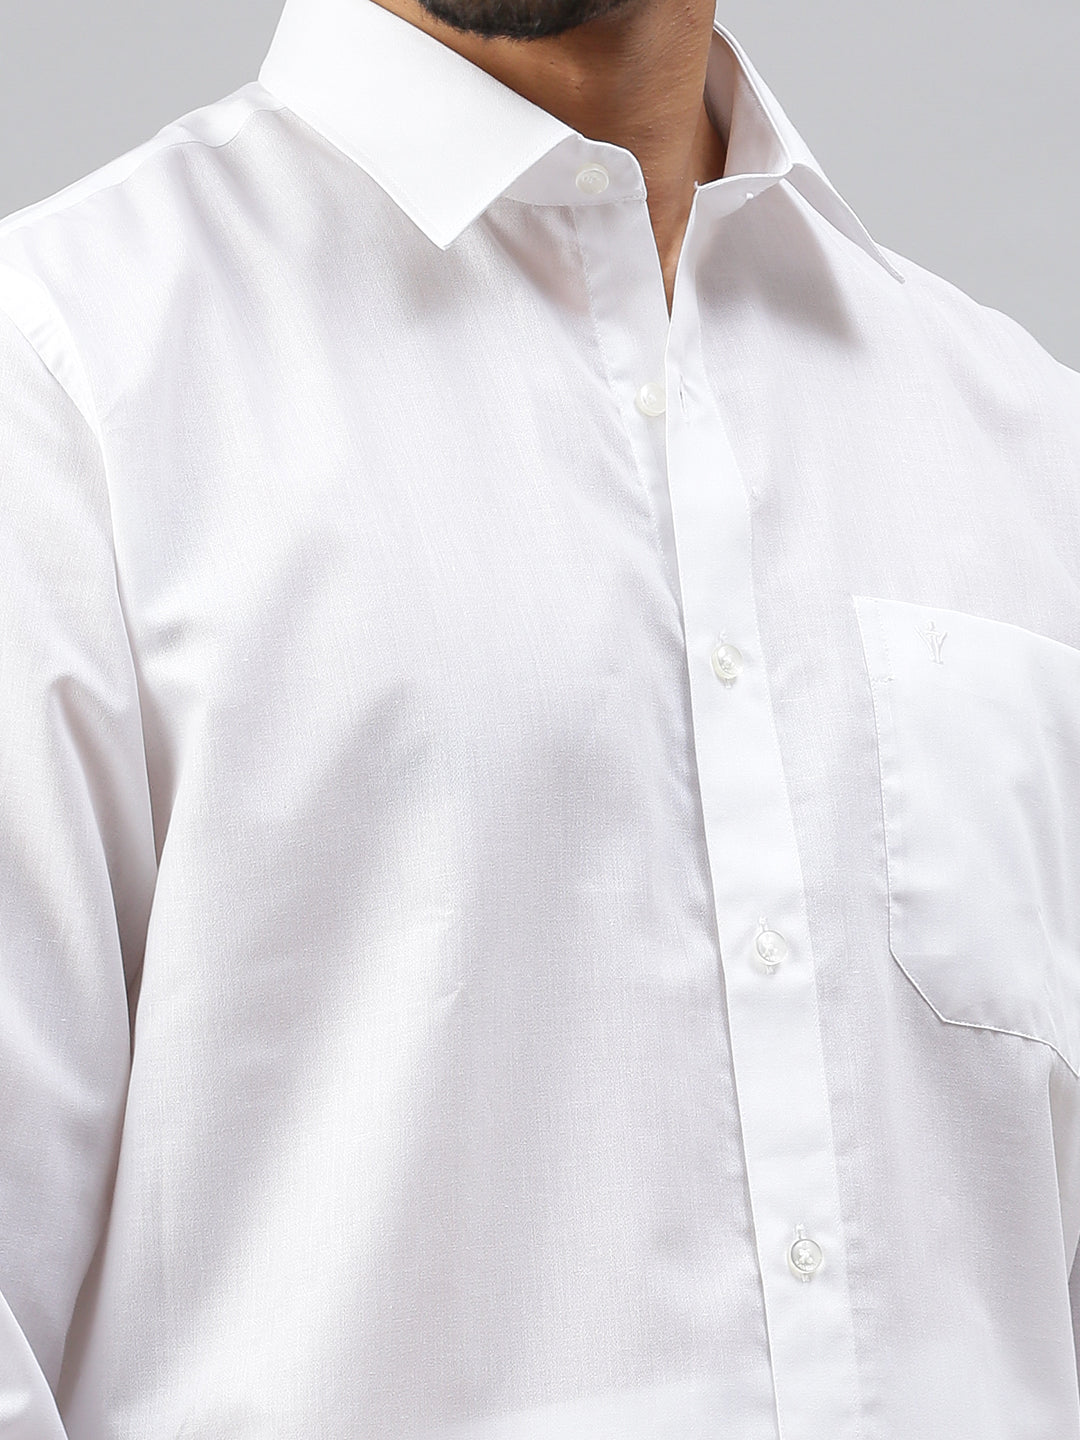 Mens 100% Cotton White Shirt Full Sleeves Breeze Cotton -Zoom view